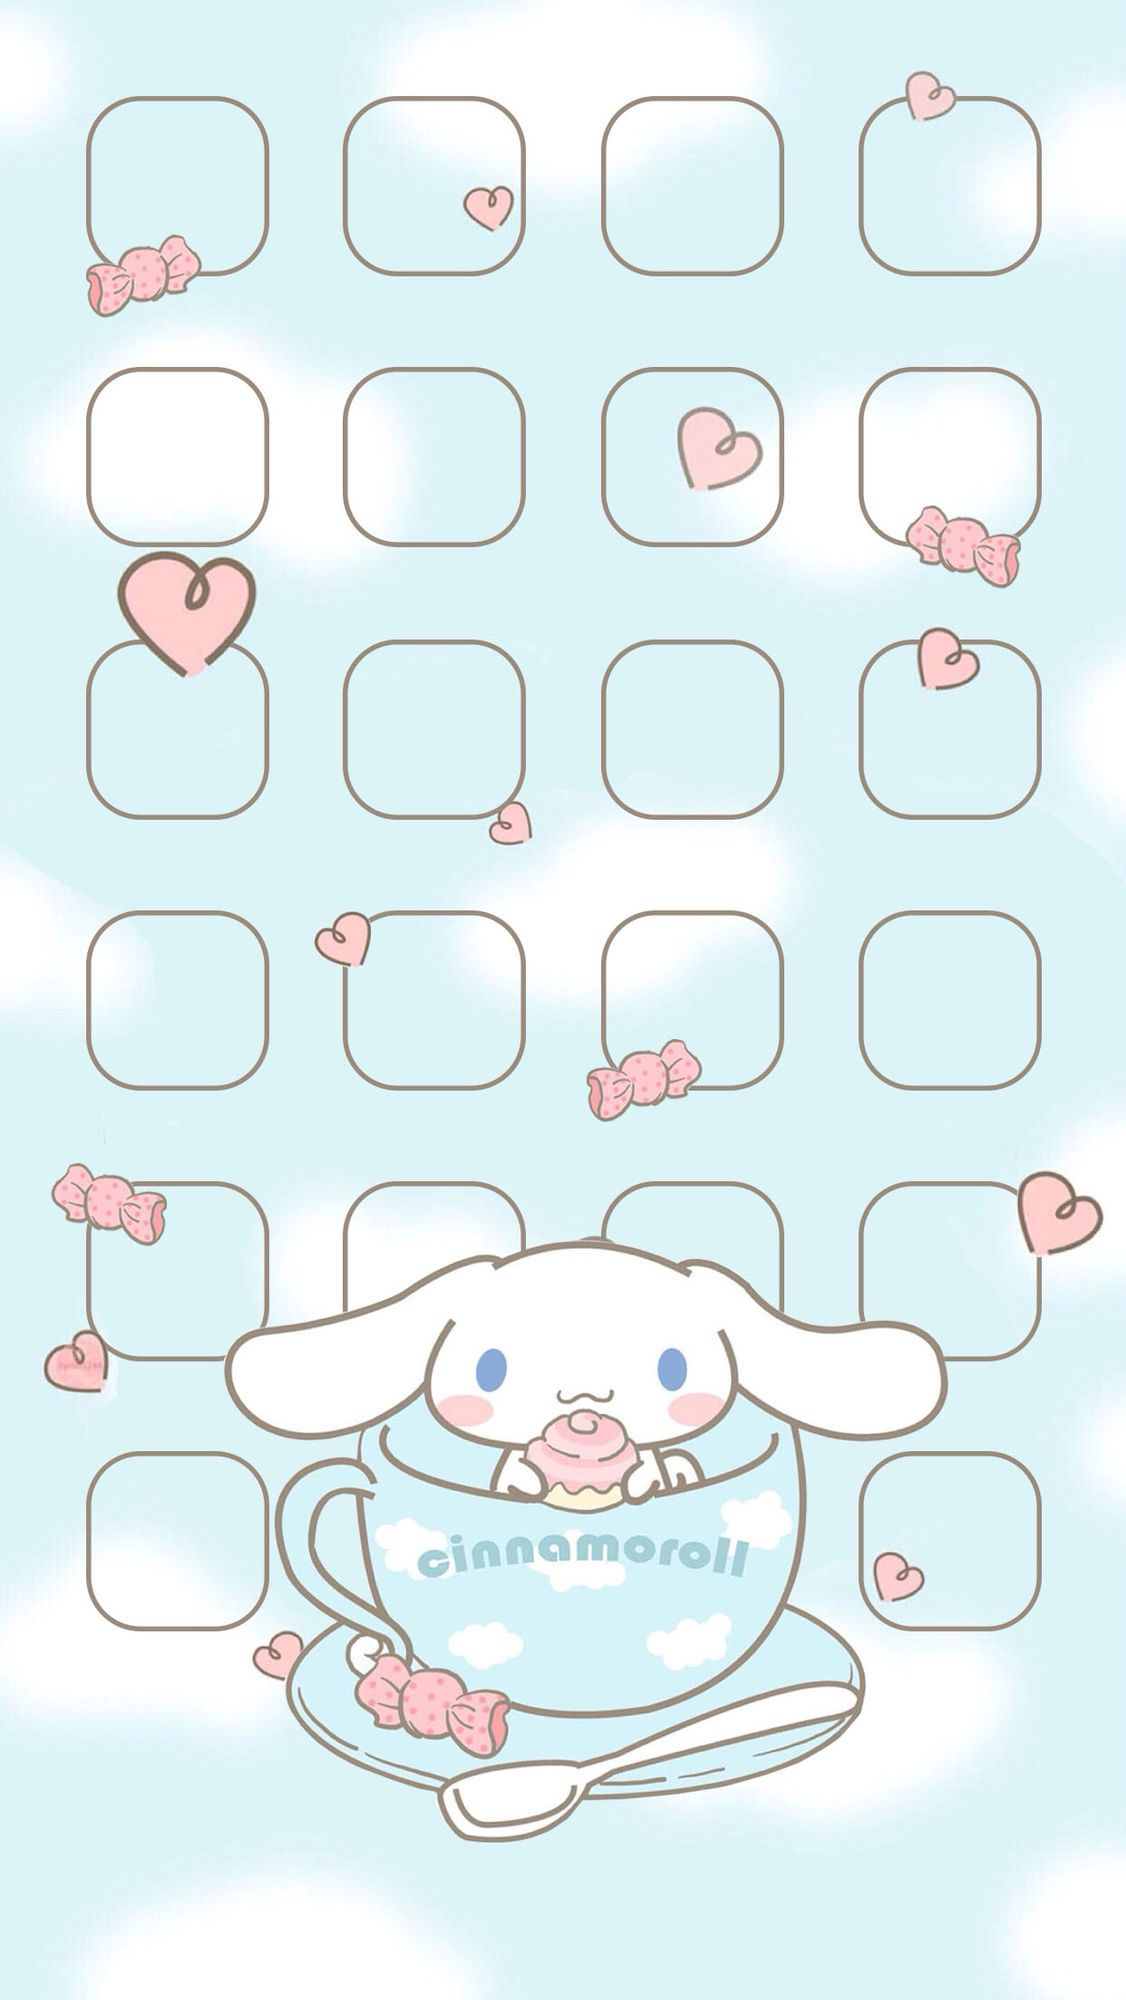 Super Cute Sanrio Wallpaper Ideas  Sanrio on Lavender Background for iPhone   Phone  Idea Wallpapers  iPhone WallpapersColor Schemes